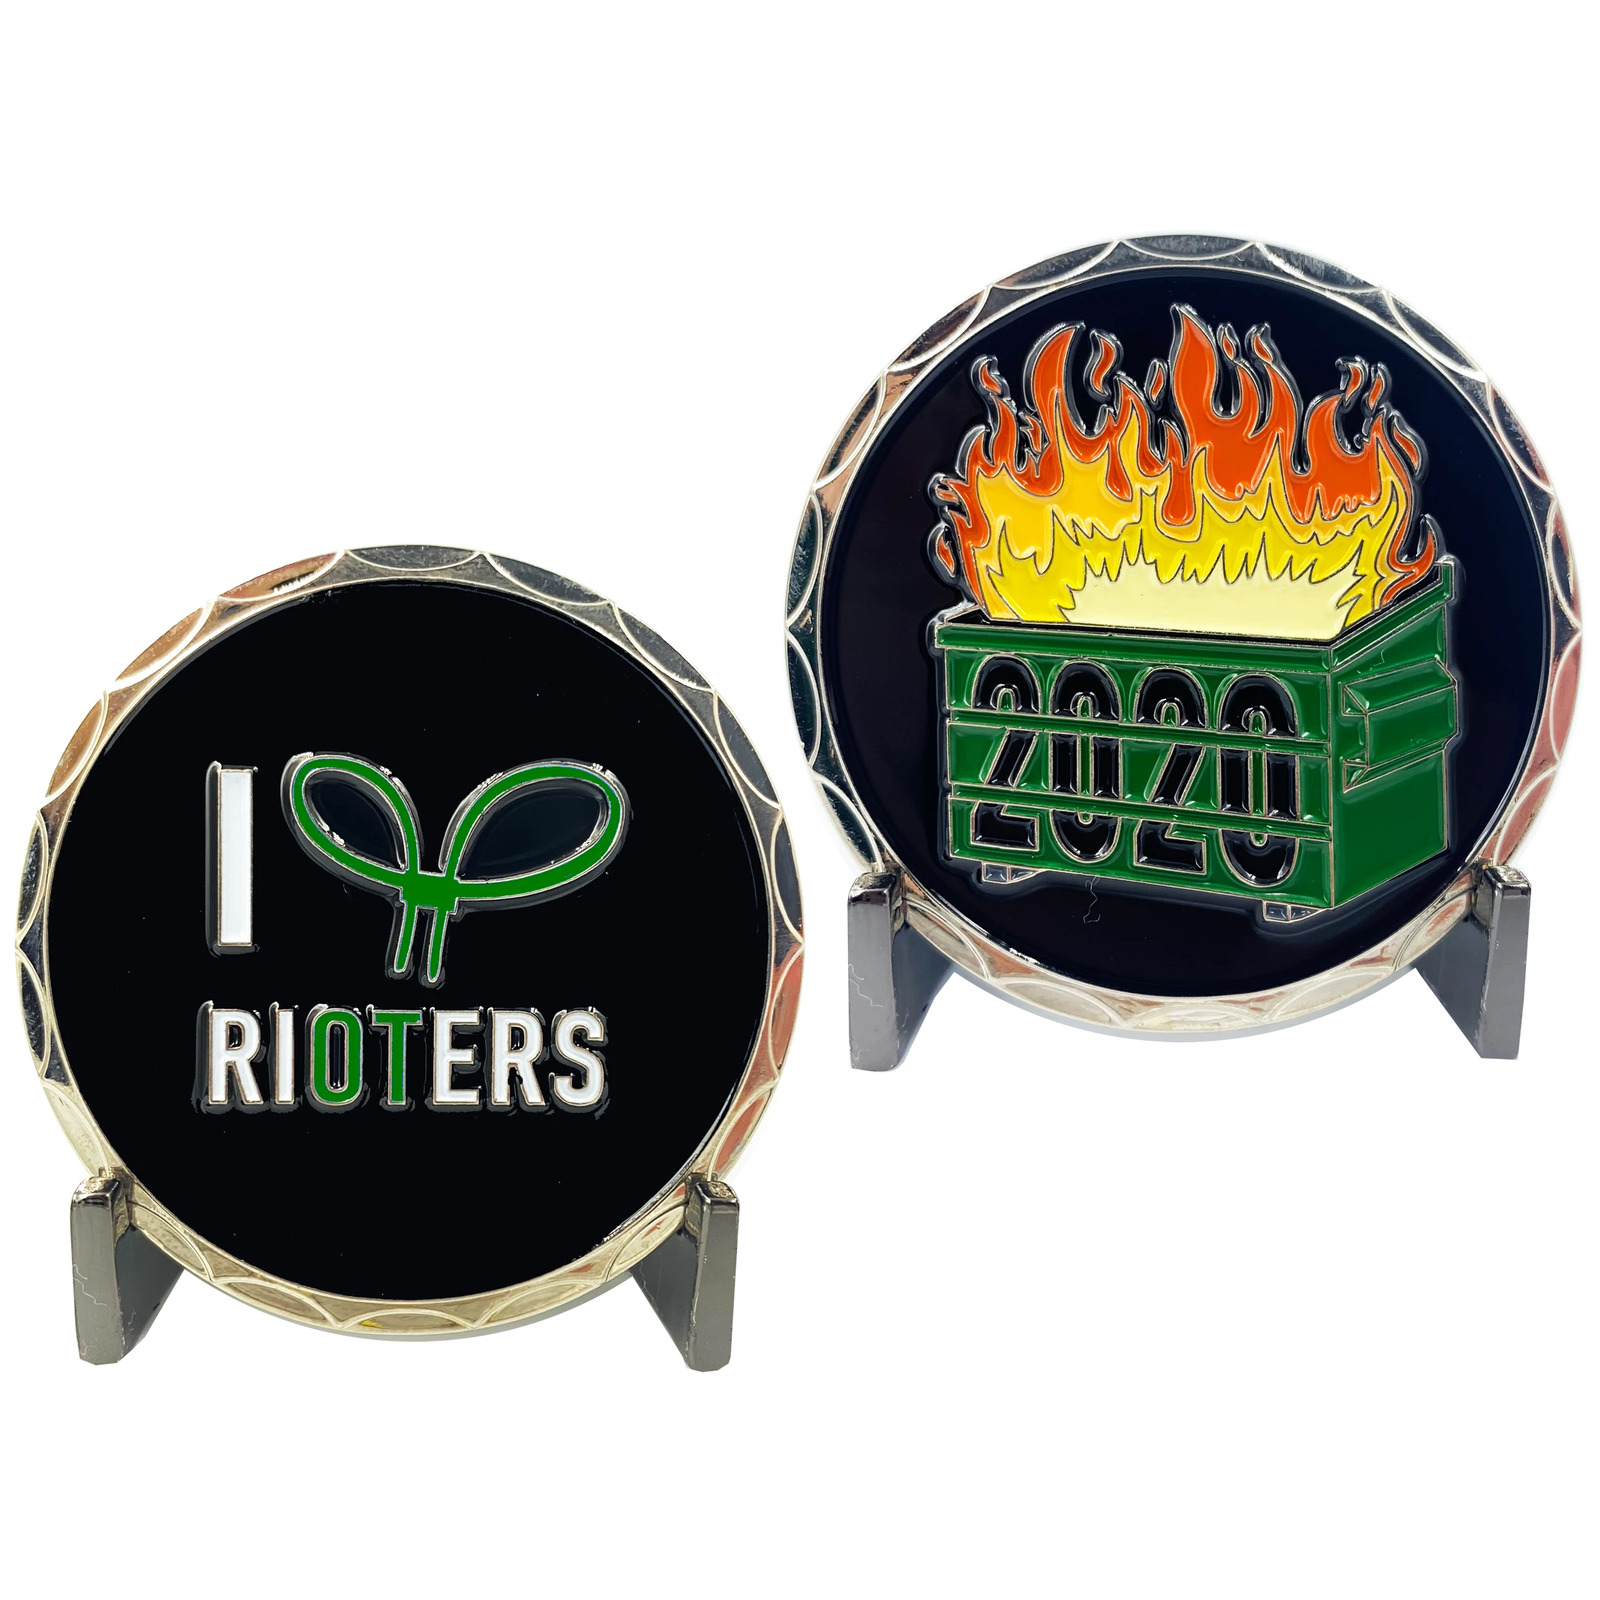 DL2-05 I Love Rioters 2020 Dumpster Fire Handcuff Zip Ties Police Thin Green Lin